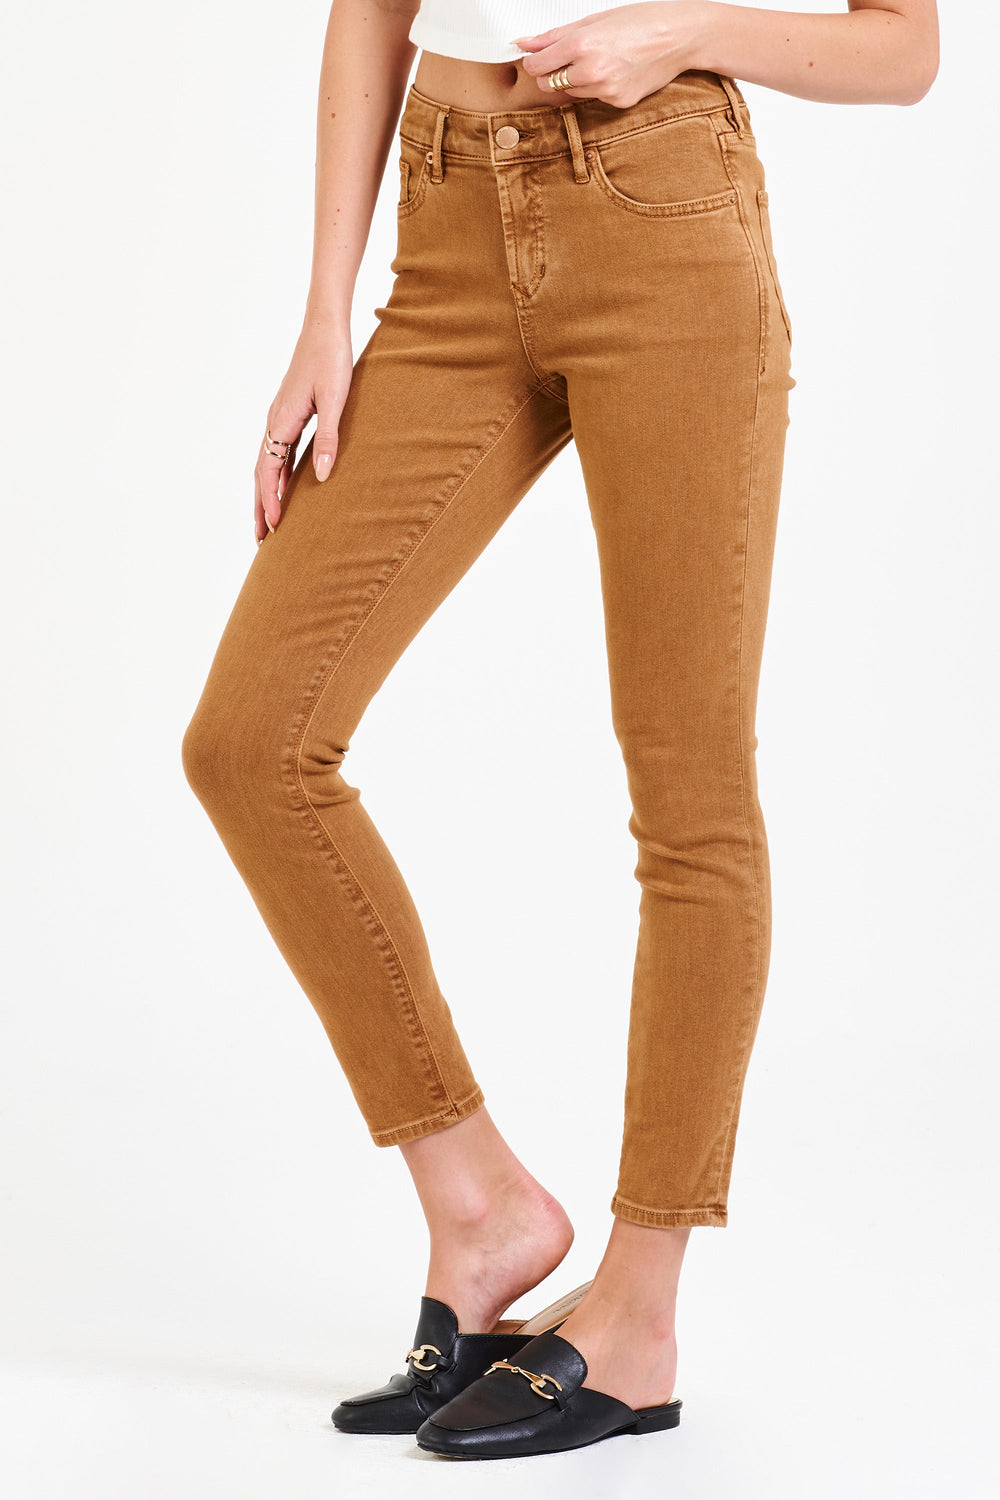 image of a female model wearing a GISELE HIGH RISE ANKLE SKINNY JEANS BUTTERSCOTCH JEANS